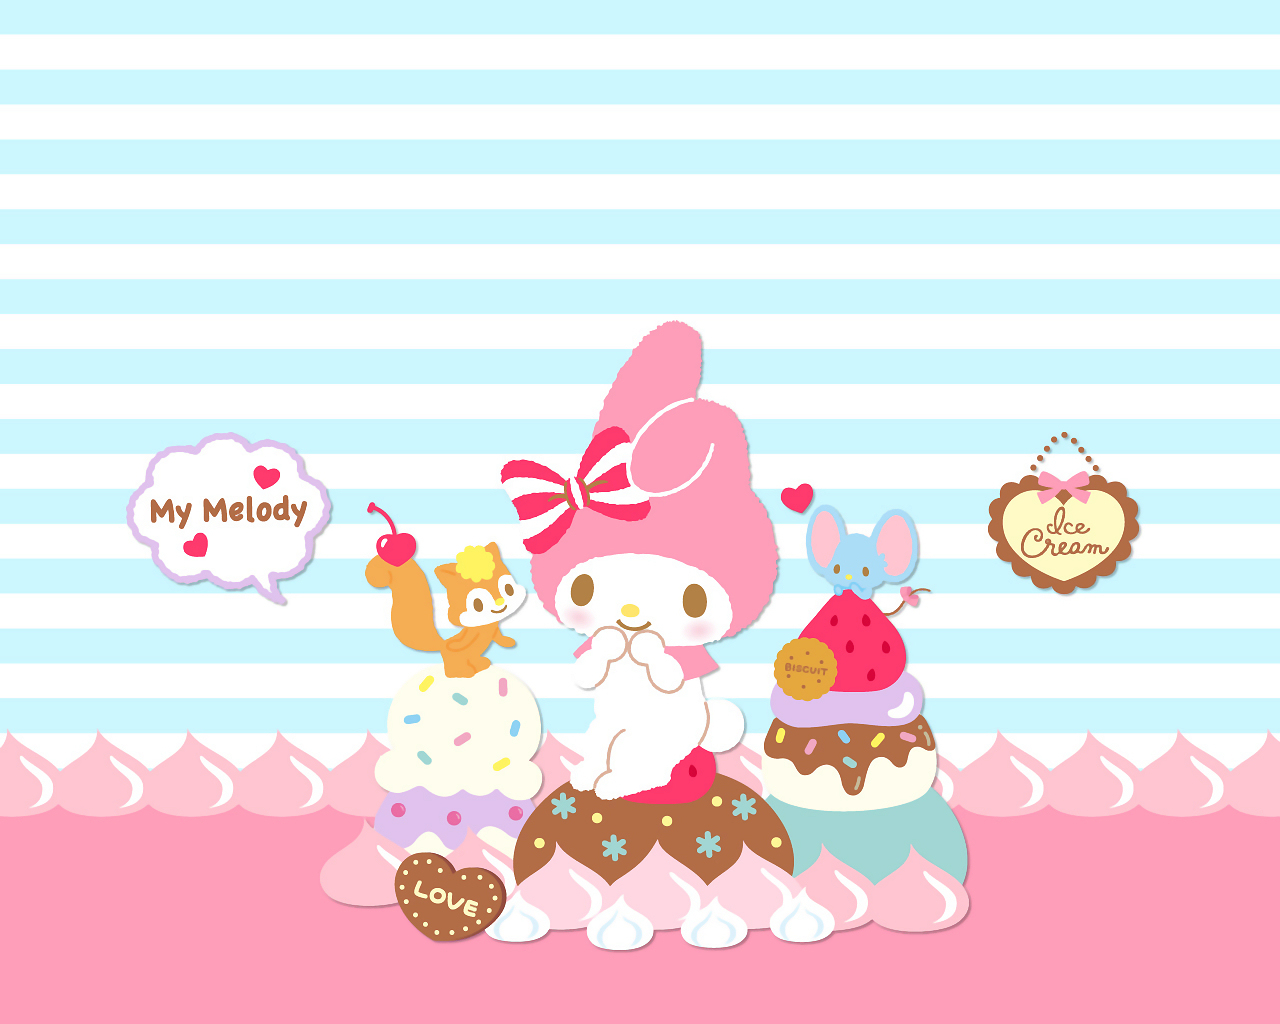 Free download My Melody Sanrio Dibujo and Sanrio Characters [1280x1024] for your Desktop, Mobile & Tablet. Explore My Melody Wallpaper for iPhone. Kuromi Wallpaper, Sanrio Wallpaper Free Download, My